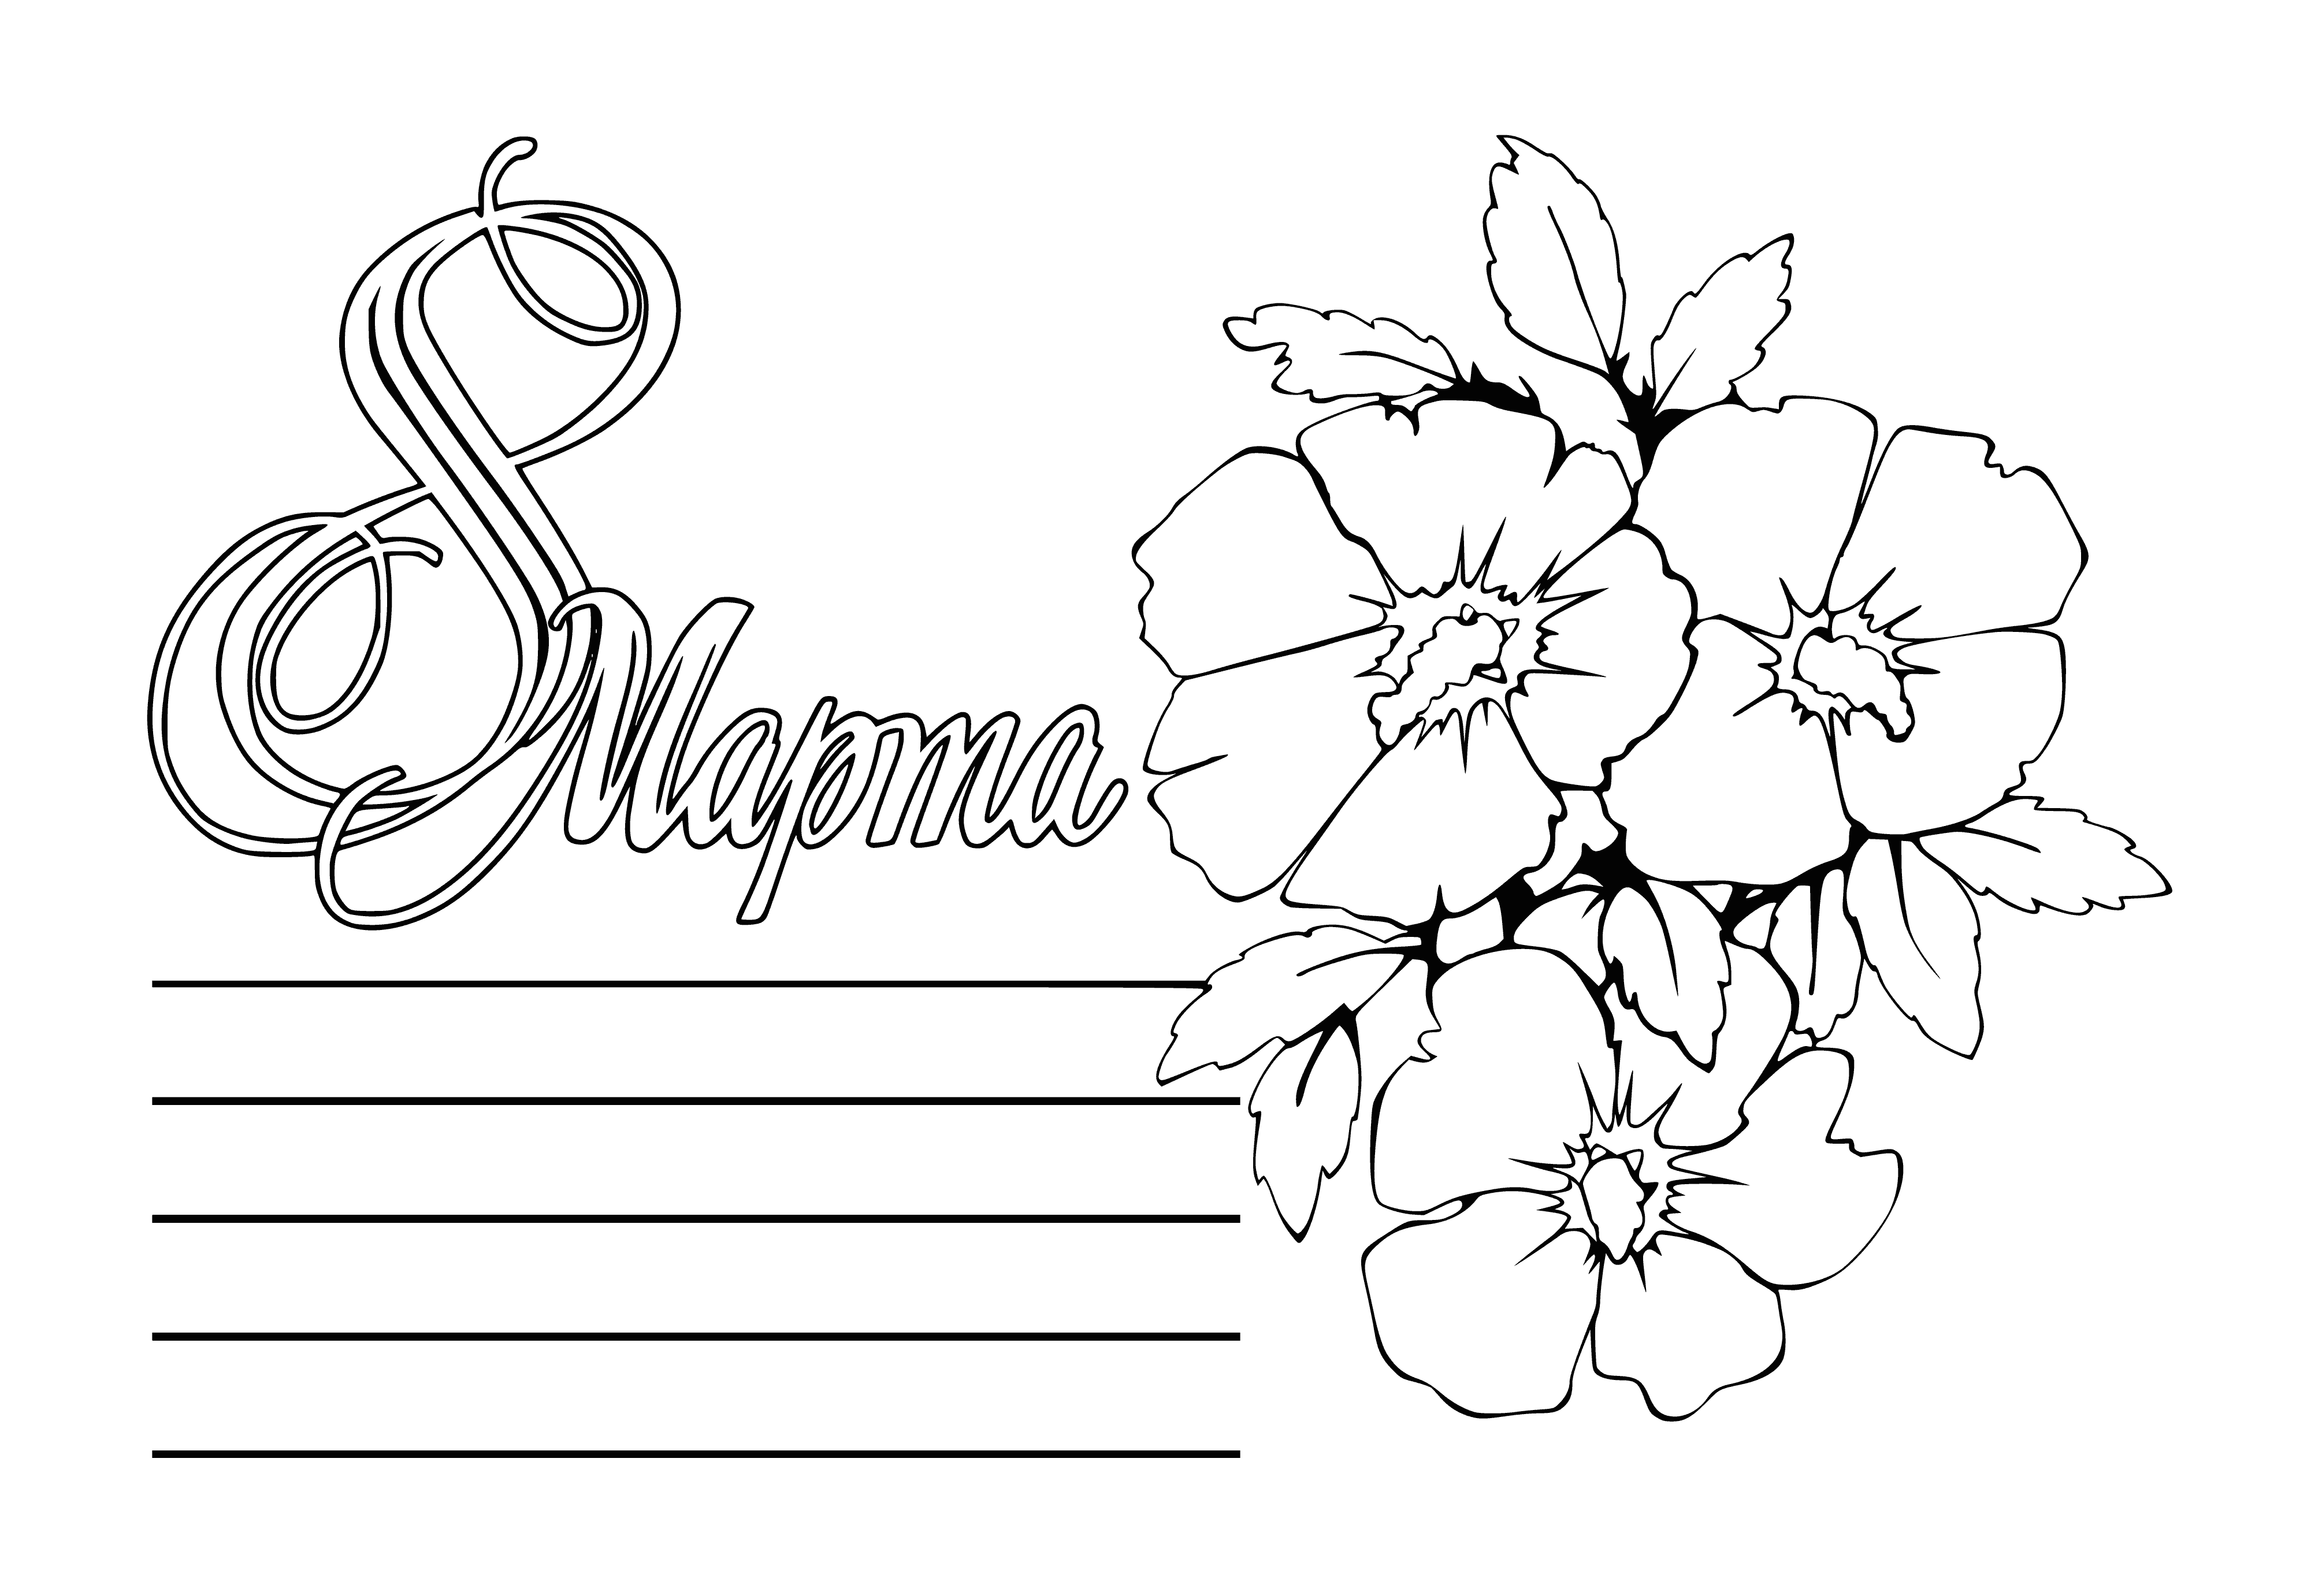 Postcard March 8 coloring page